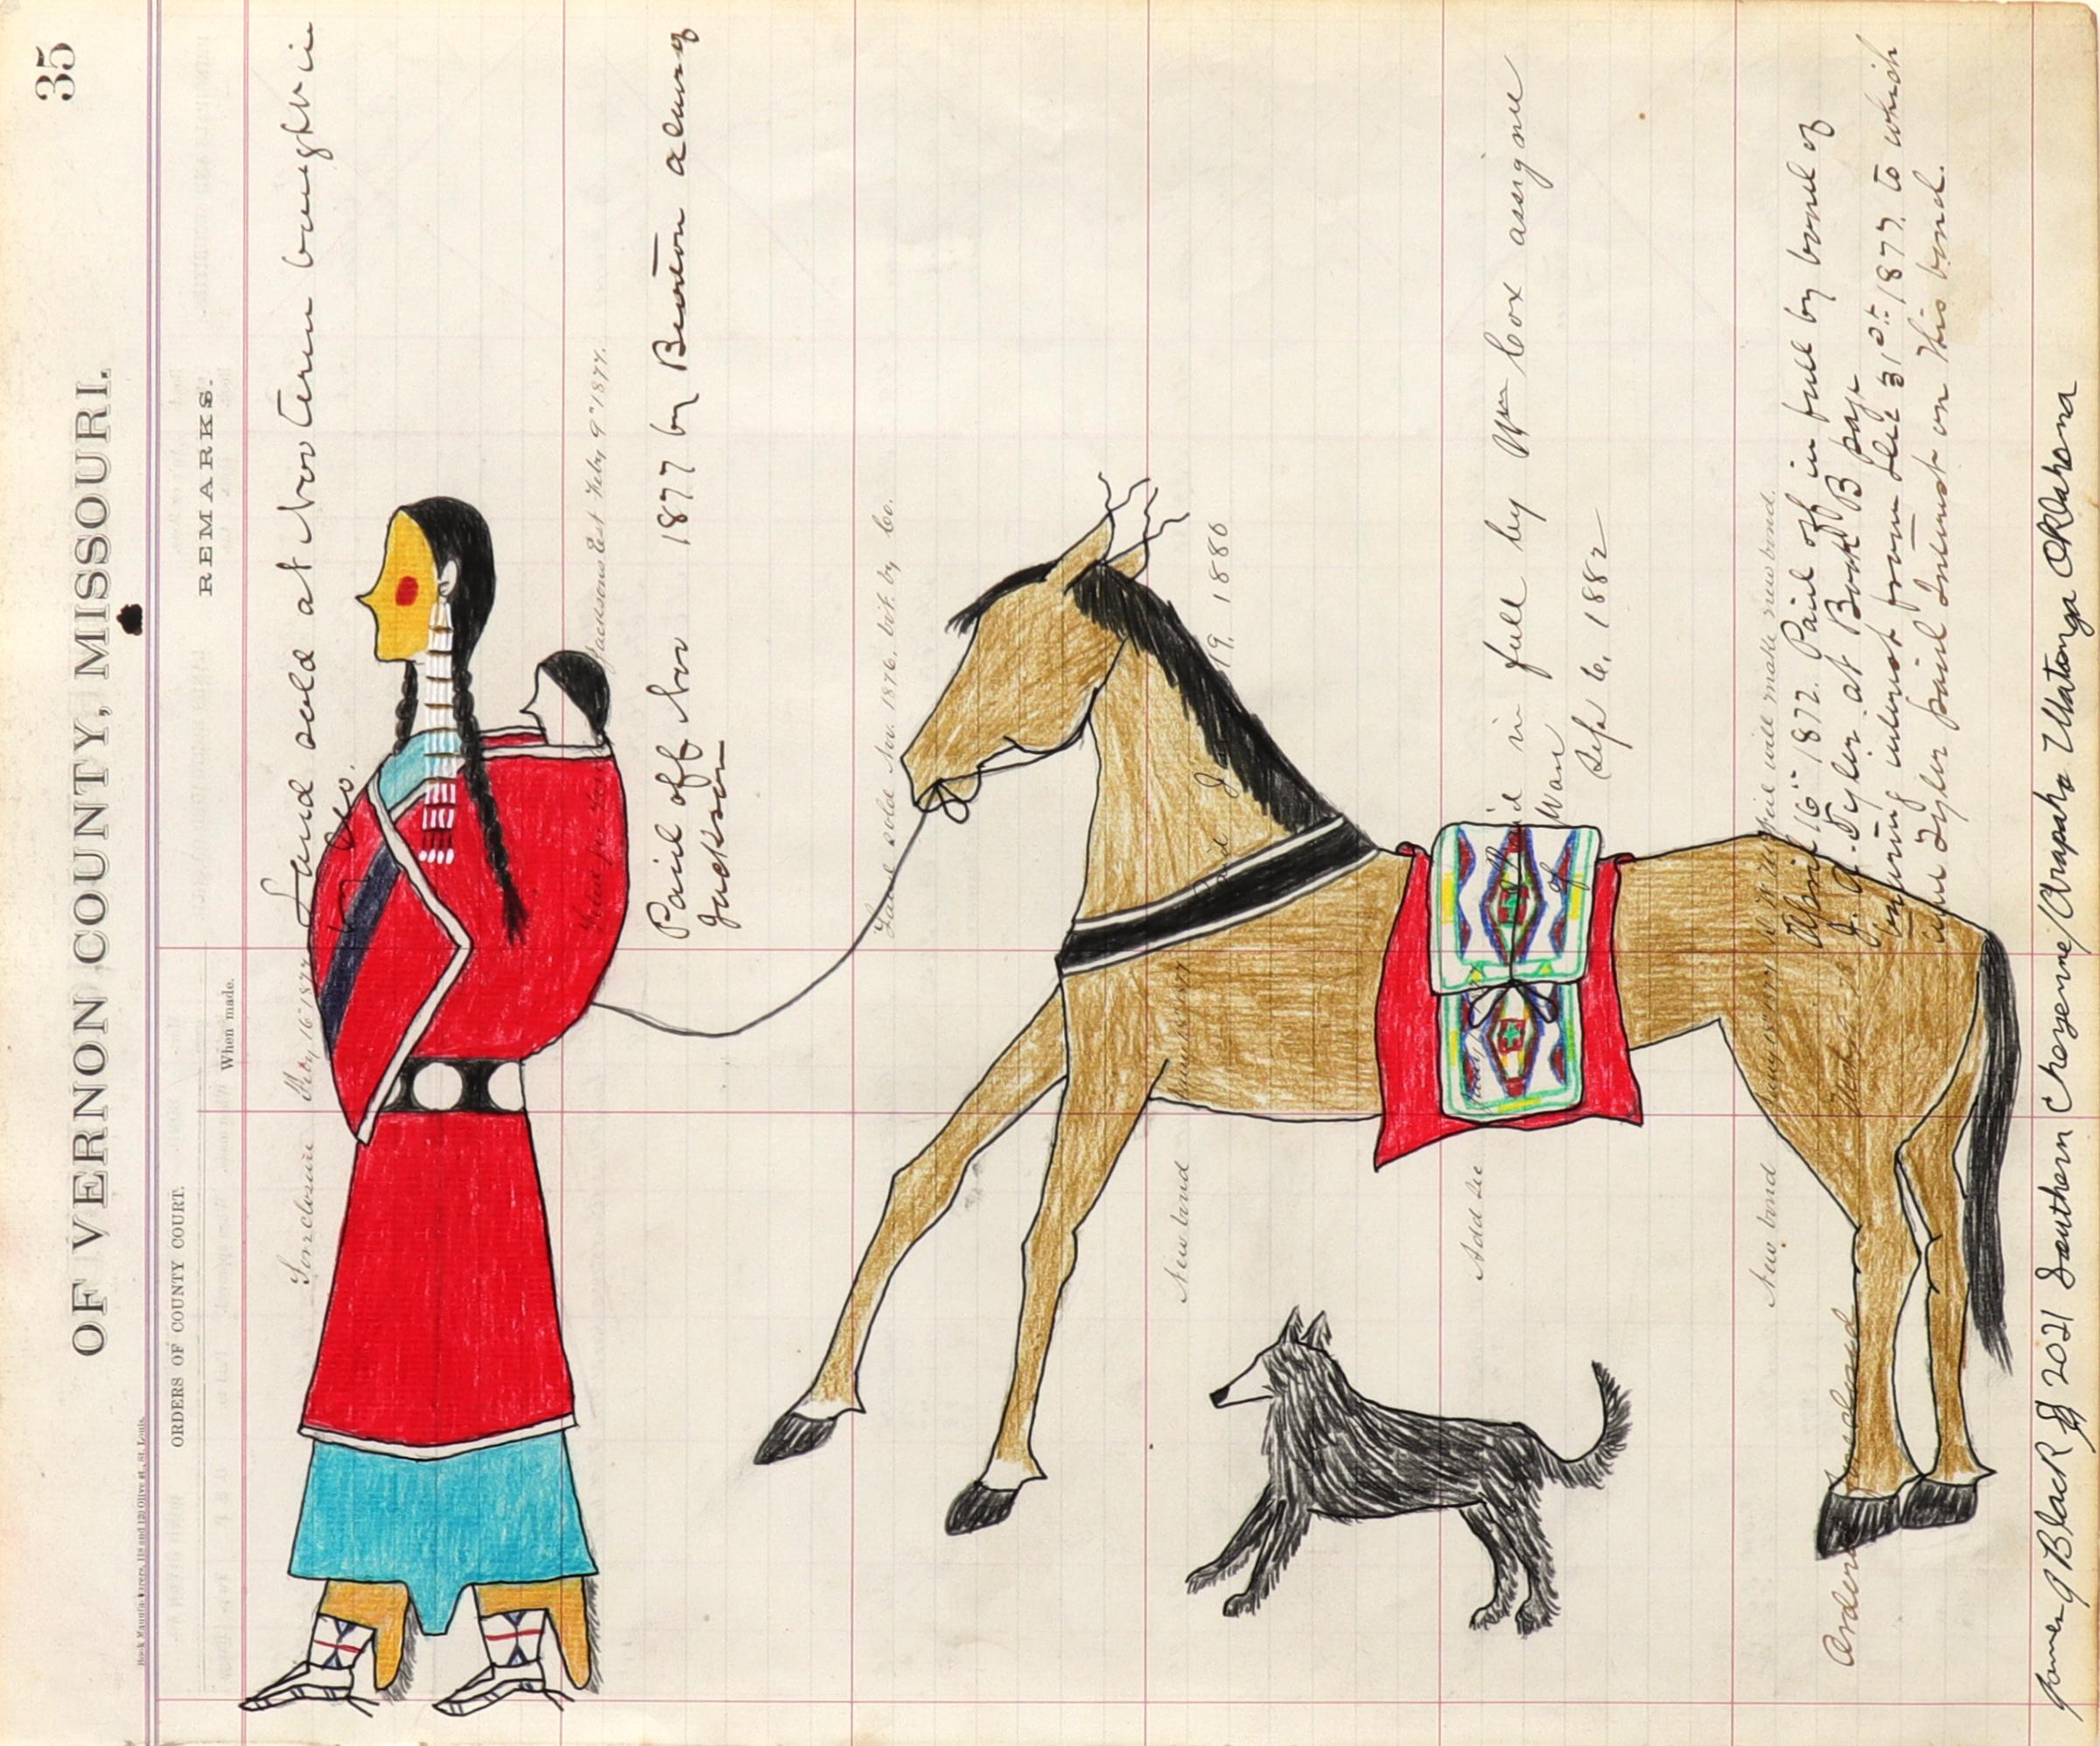 Woman with Baby, Horse, and Dog - original ledger style drawing by contemporary Native American artist, James Black, Cheyenne Arapahoe tribe. Depicting a Native American woman carrying a baby wearing traditional dress including leggings and beaded